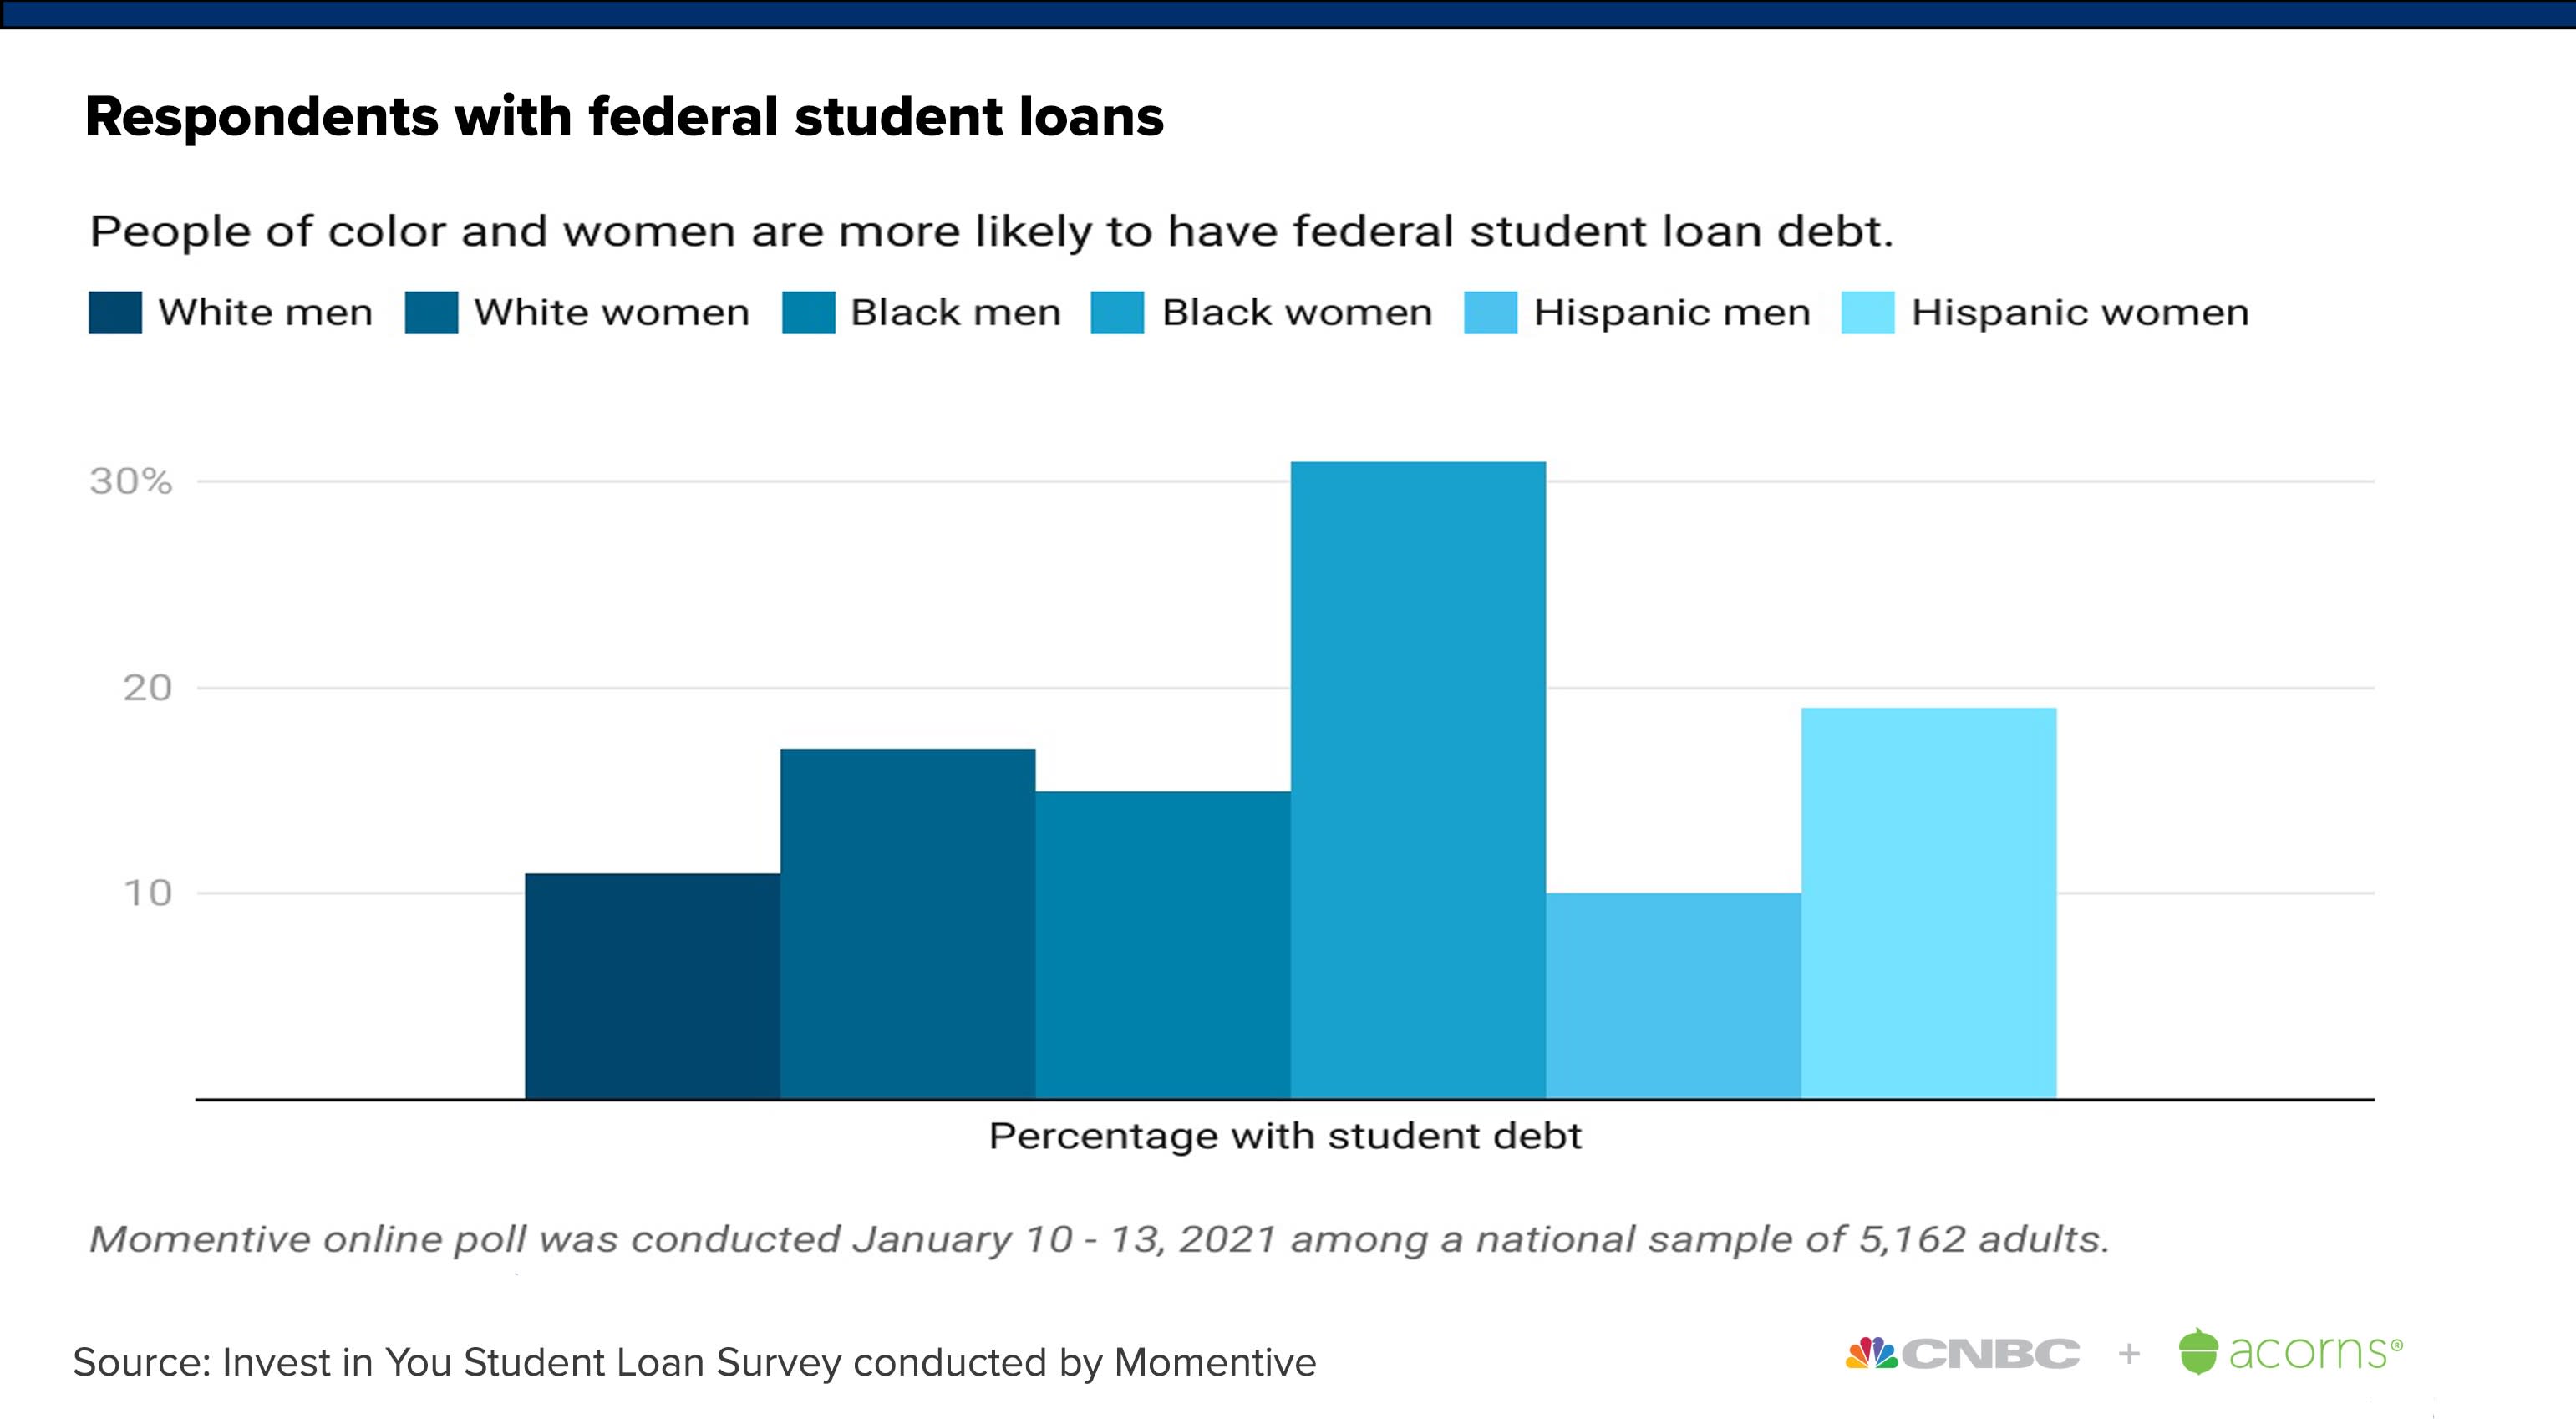 8. Average federal student loan debt among Black and African American borrowers is $27,260